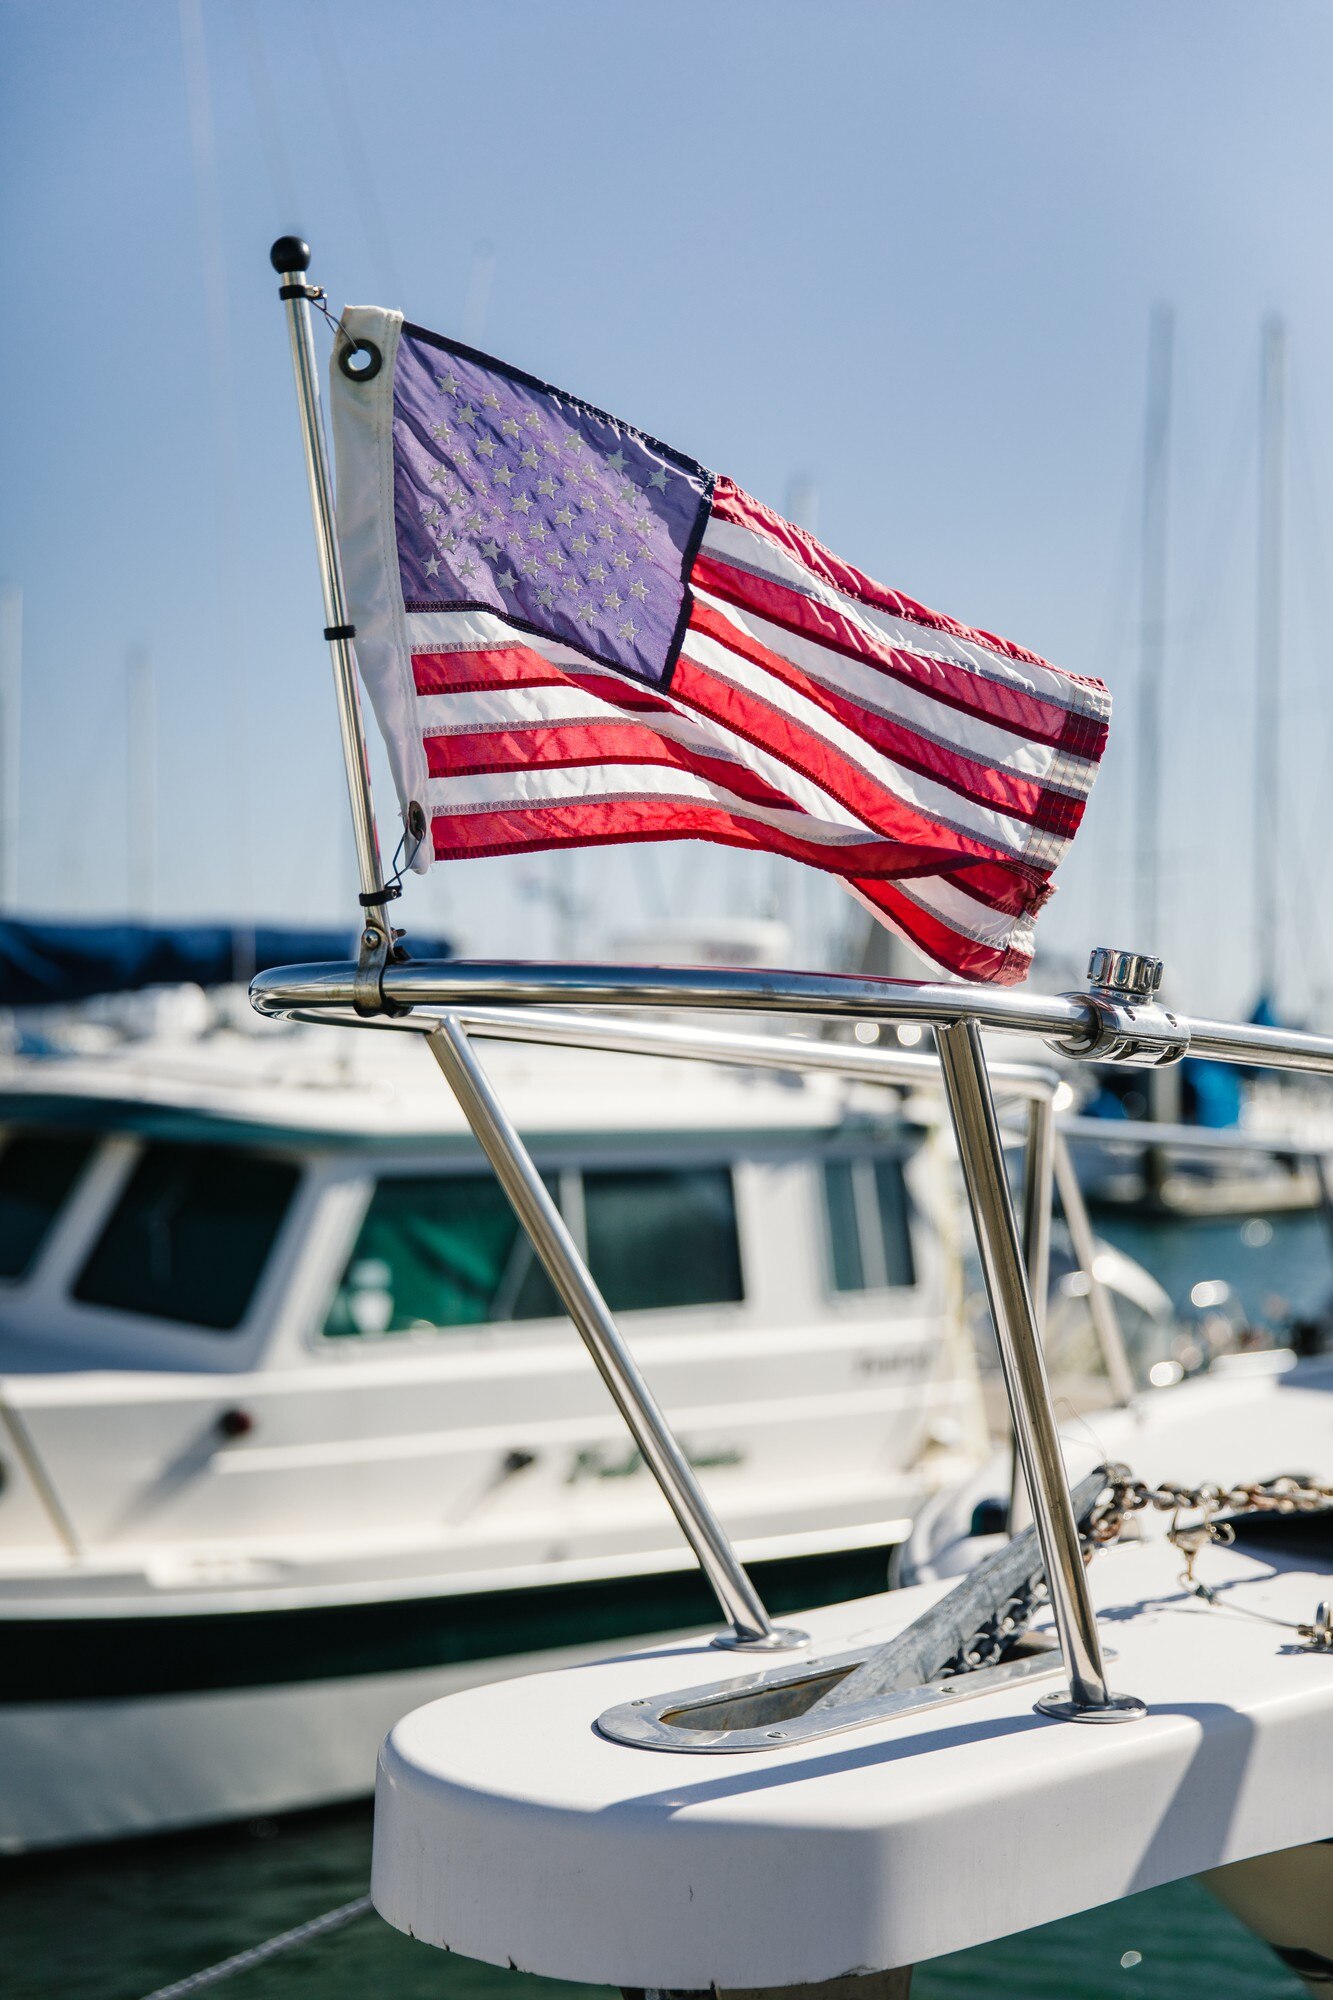 US flag placed in front of a boat